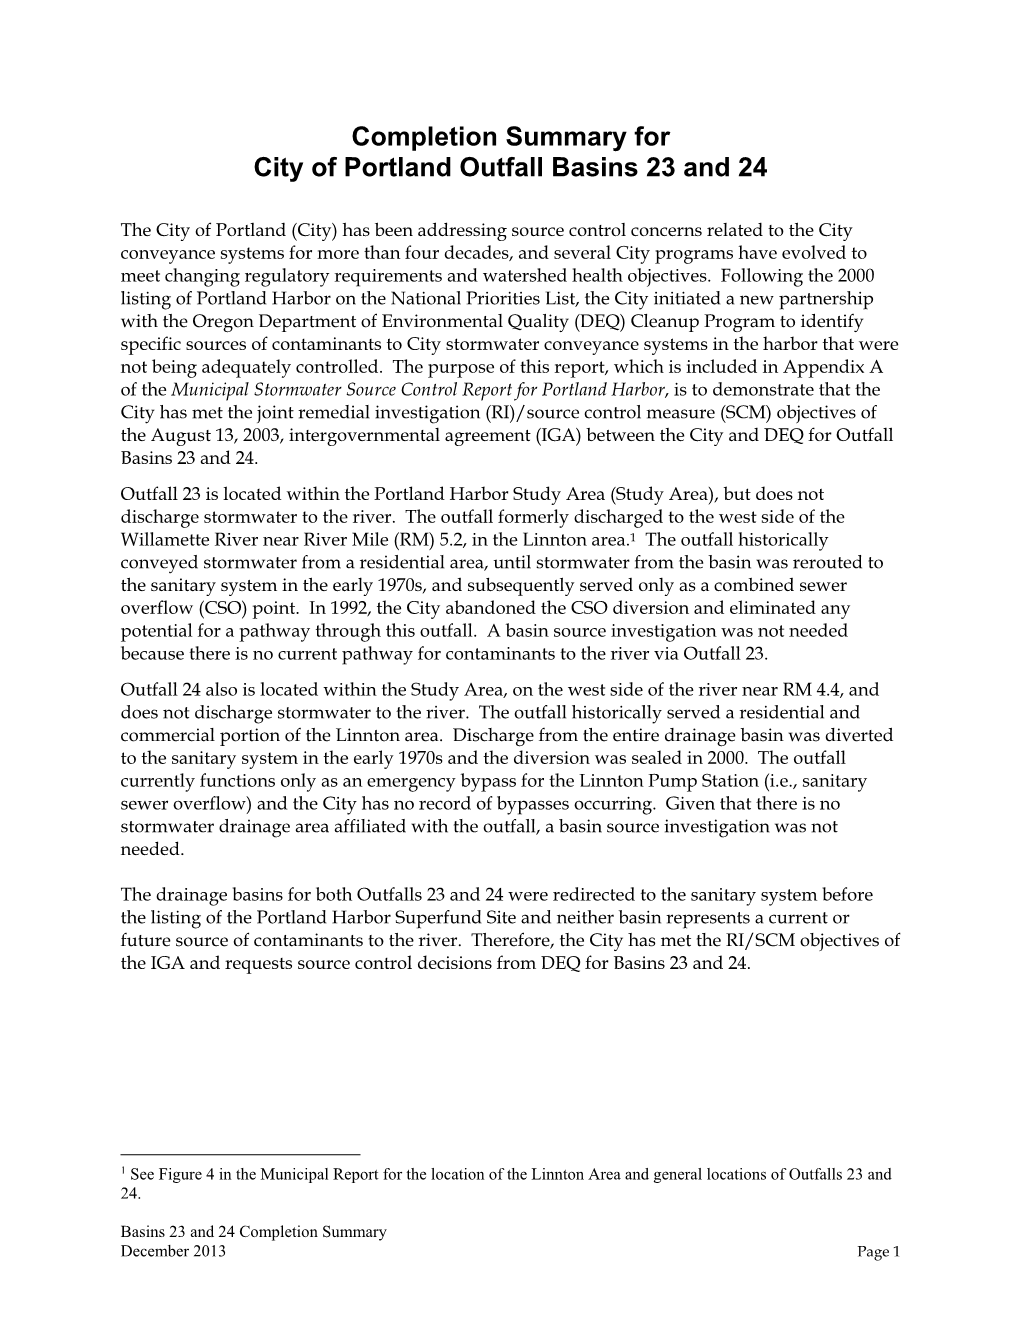 Completion Summary for City of Portland Outfall Basins 23 and 24